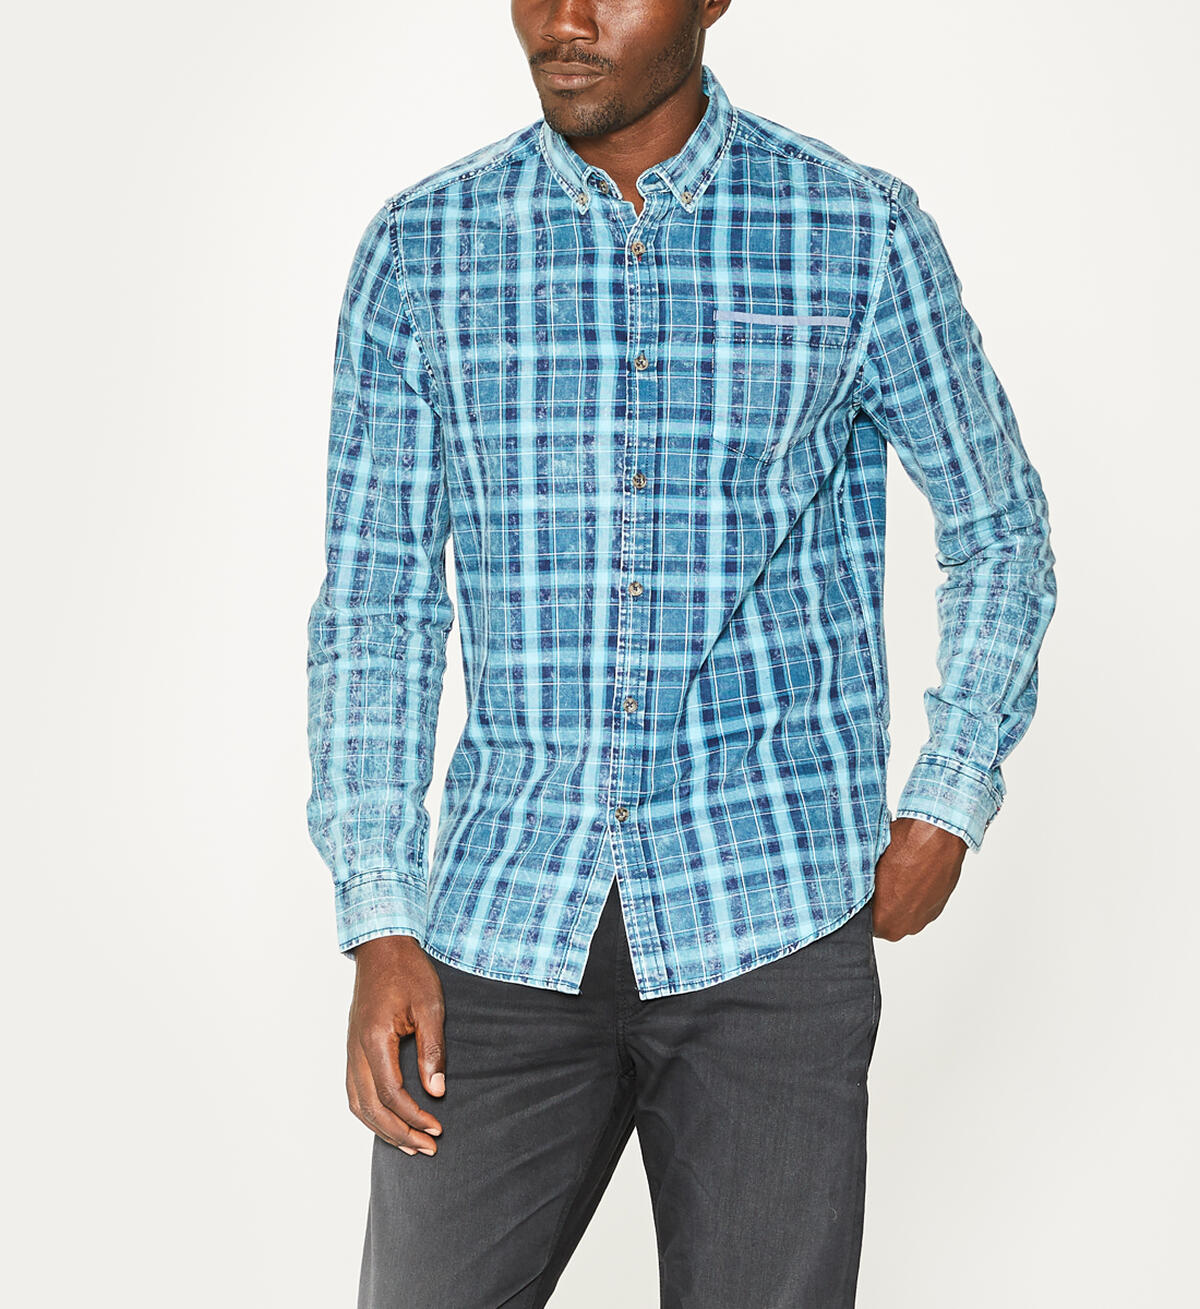 Martin Long-Sleeve Button-Down Shirt Final Sale, , hi-res image number 0